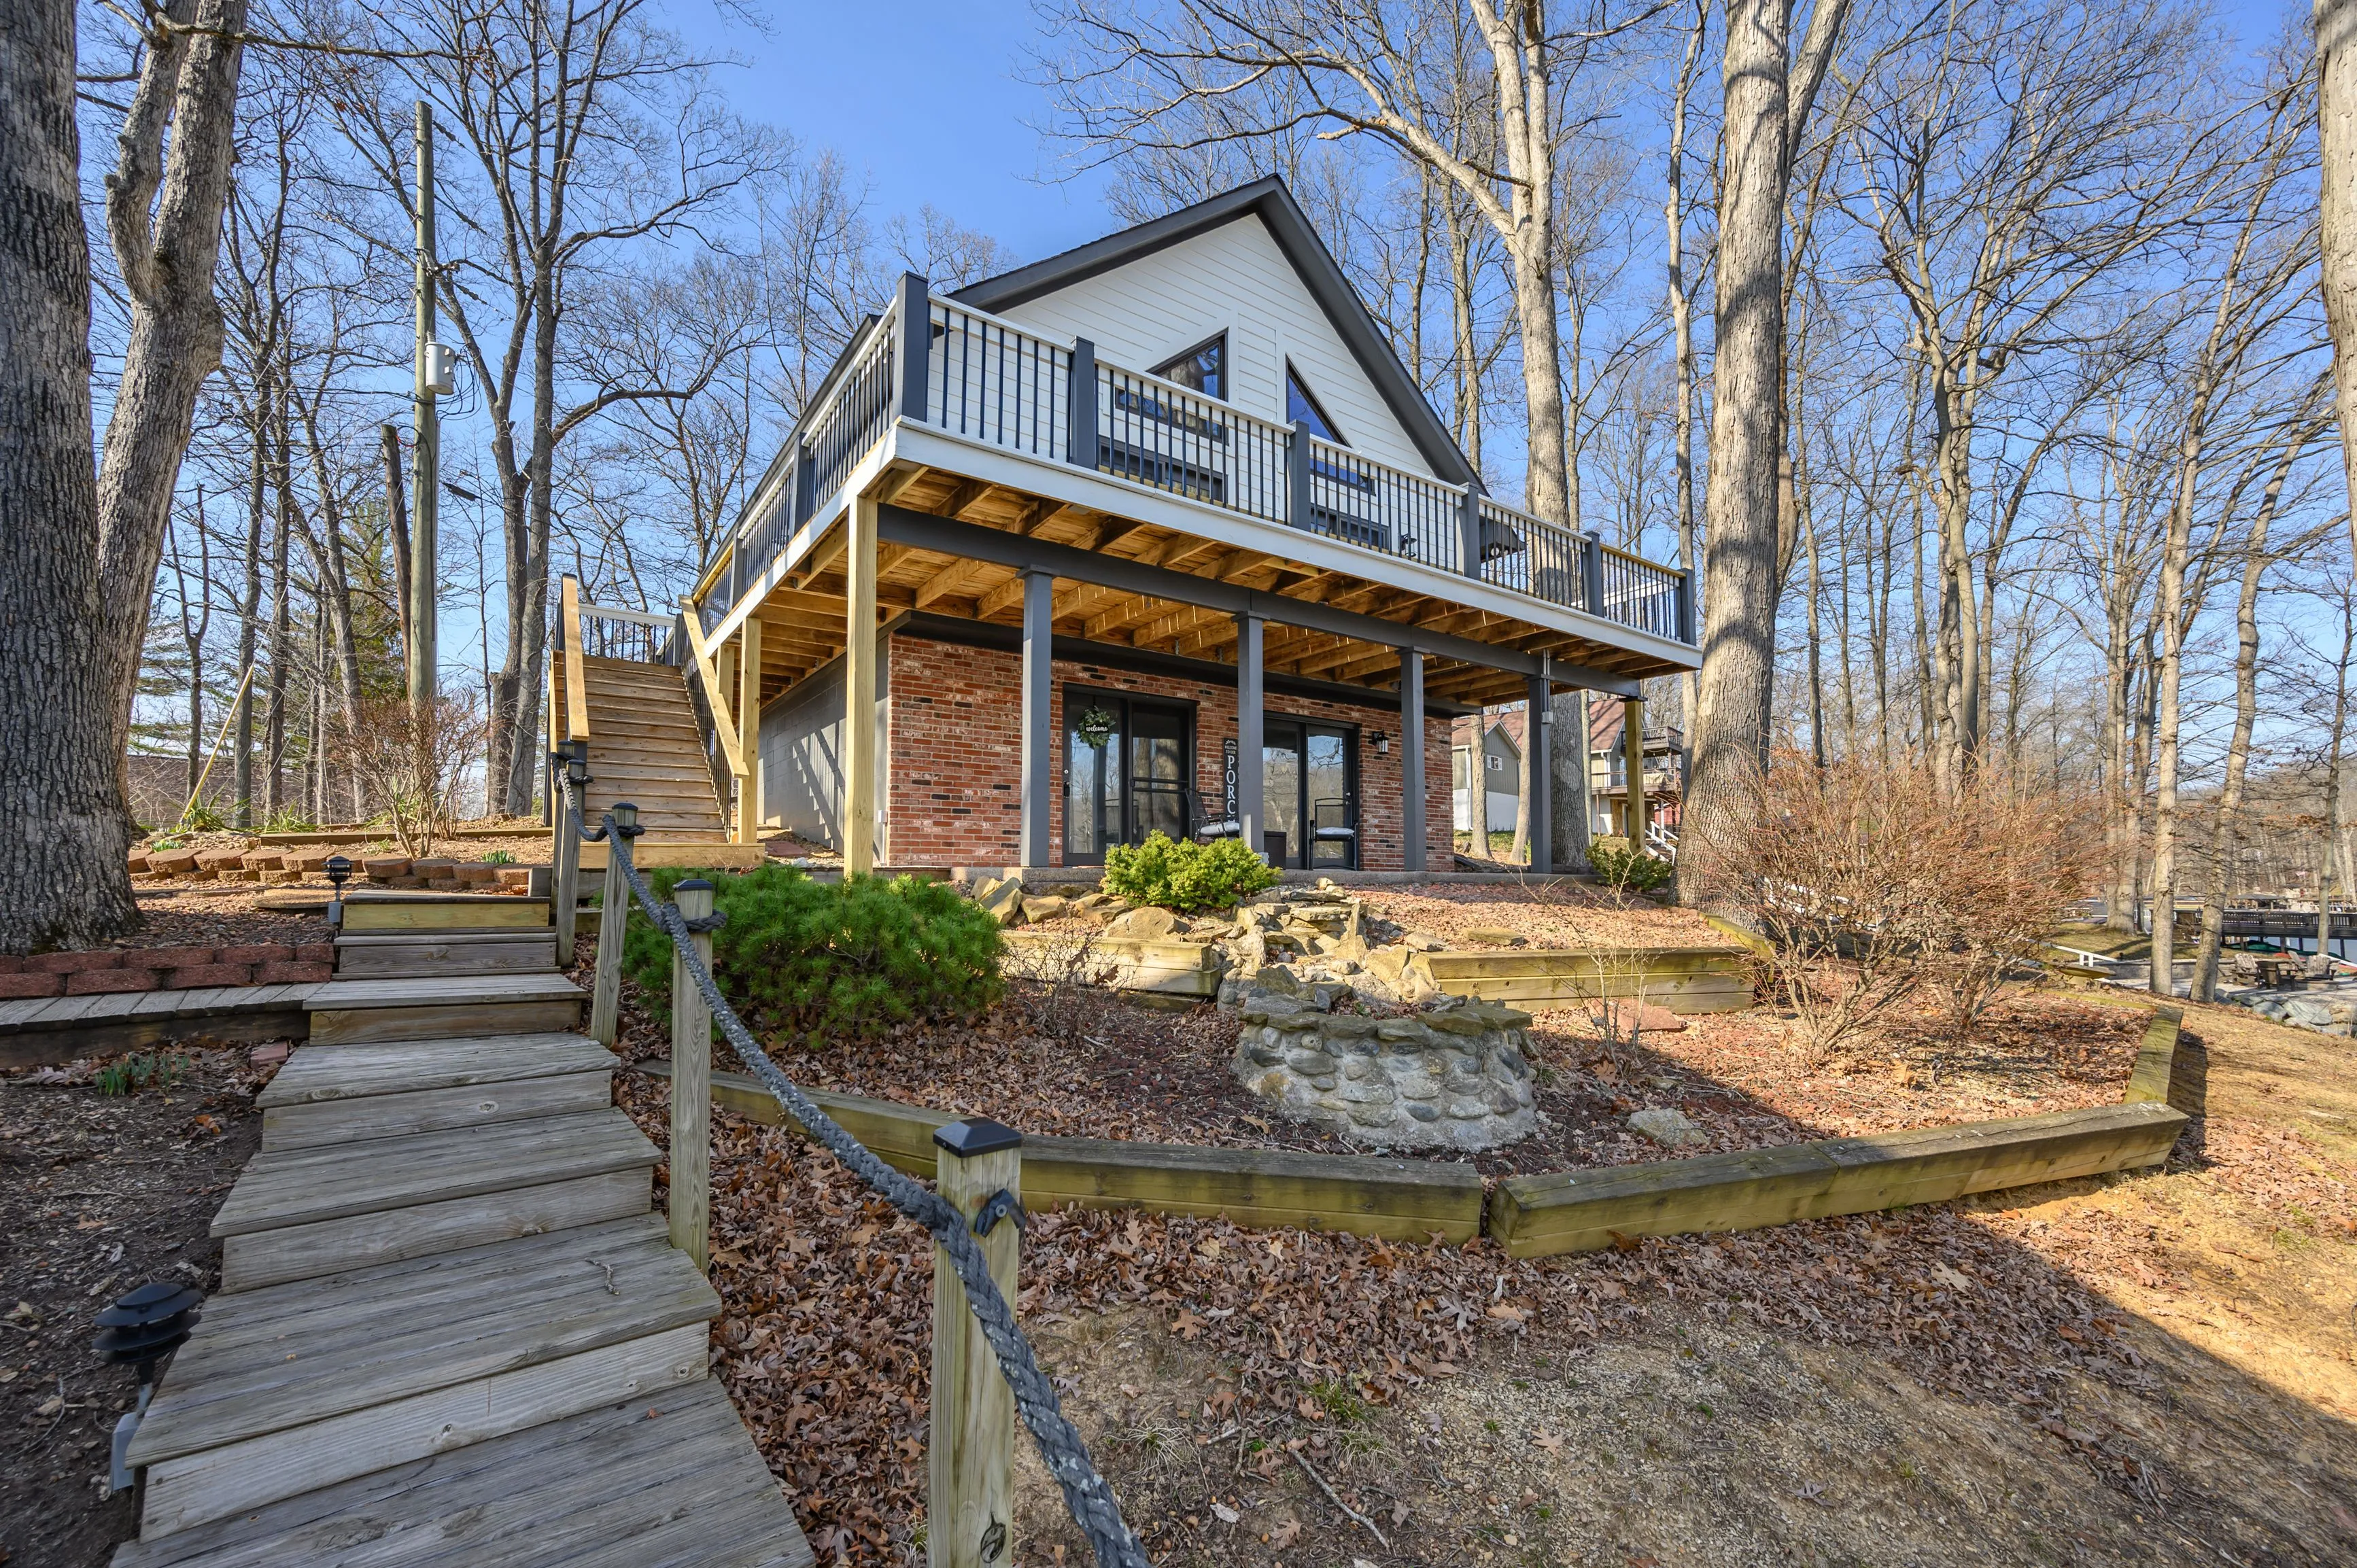 Charming two-story house with a large front porch surrounded by bare trees under a clear sky.